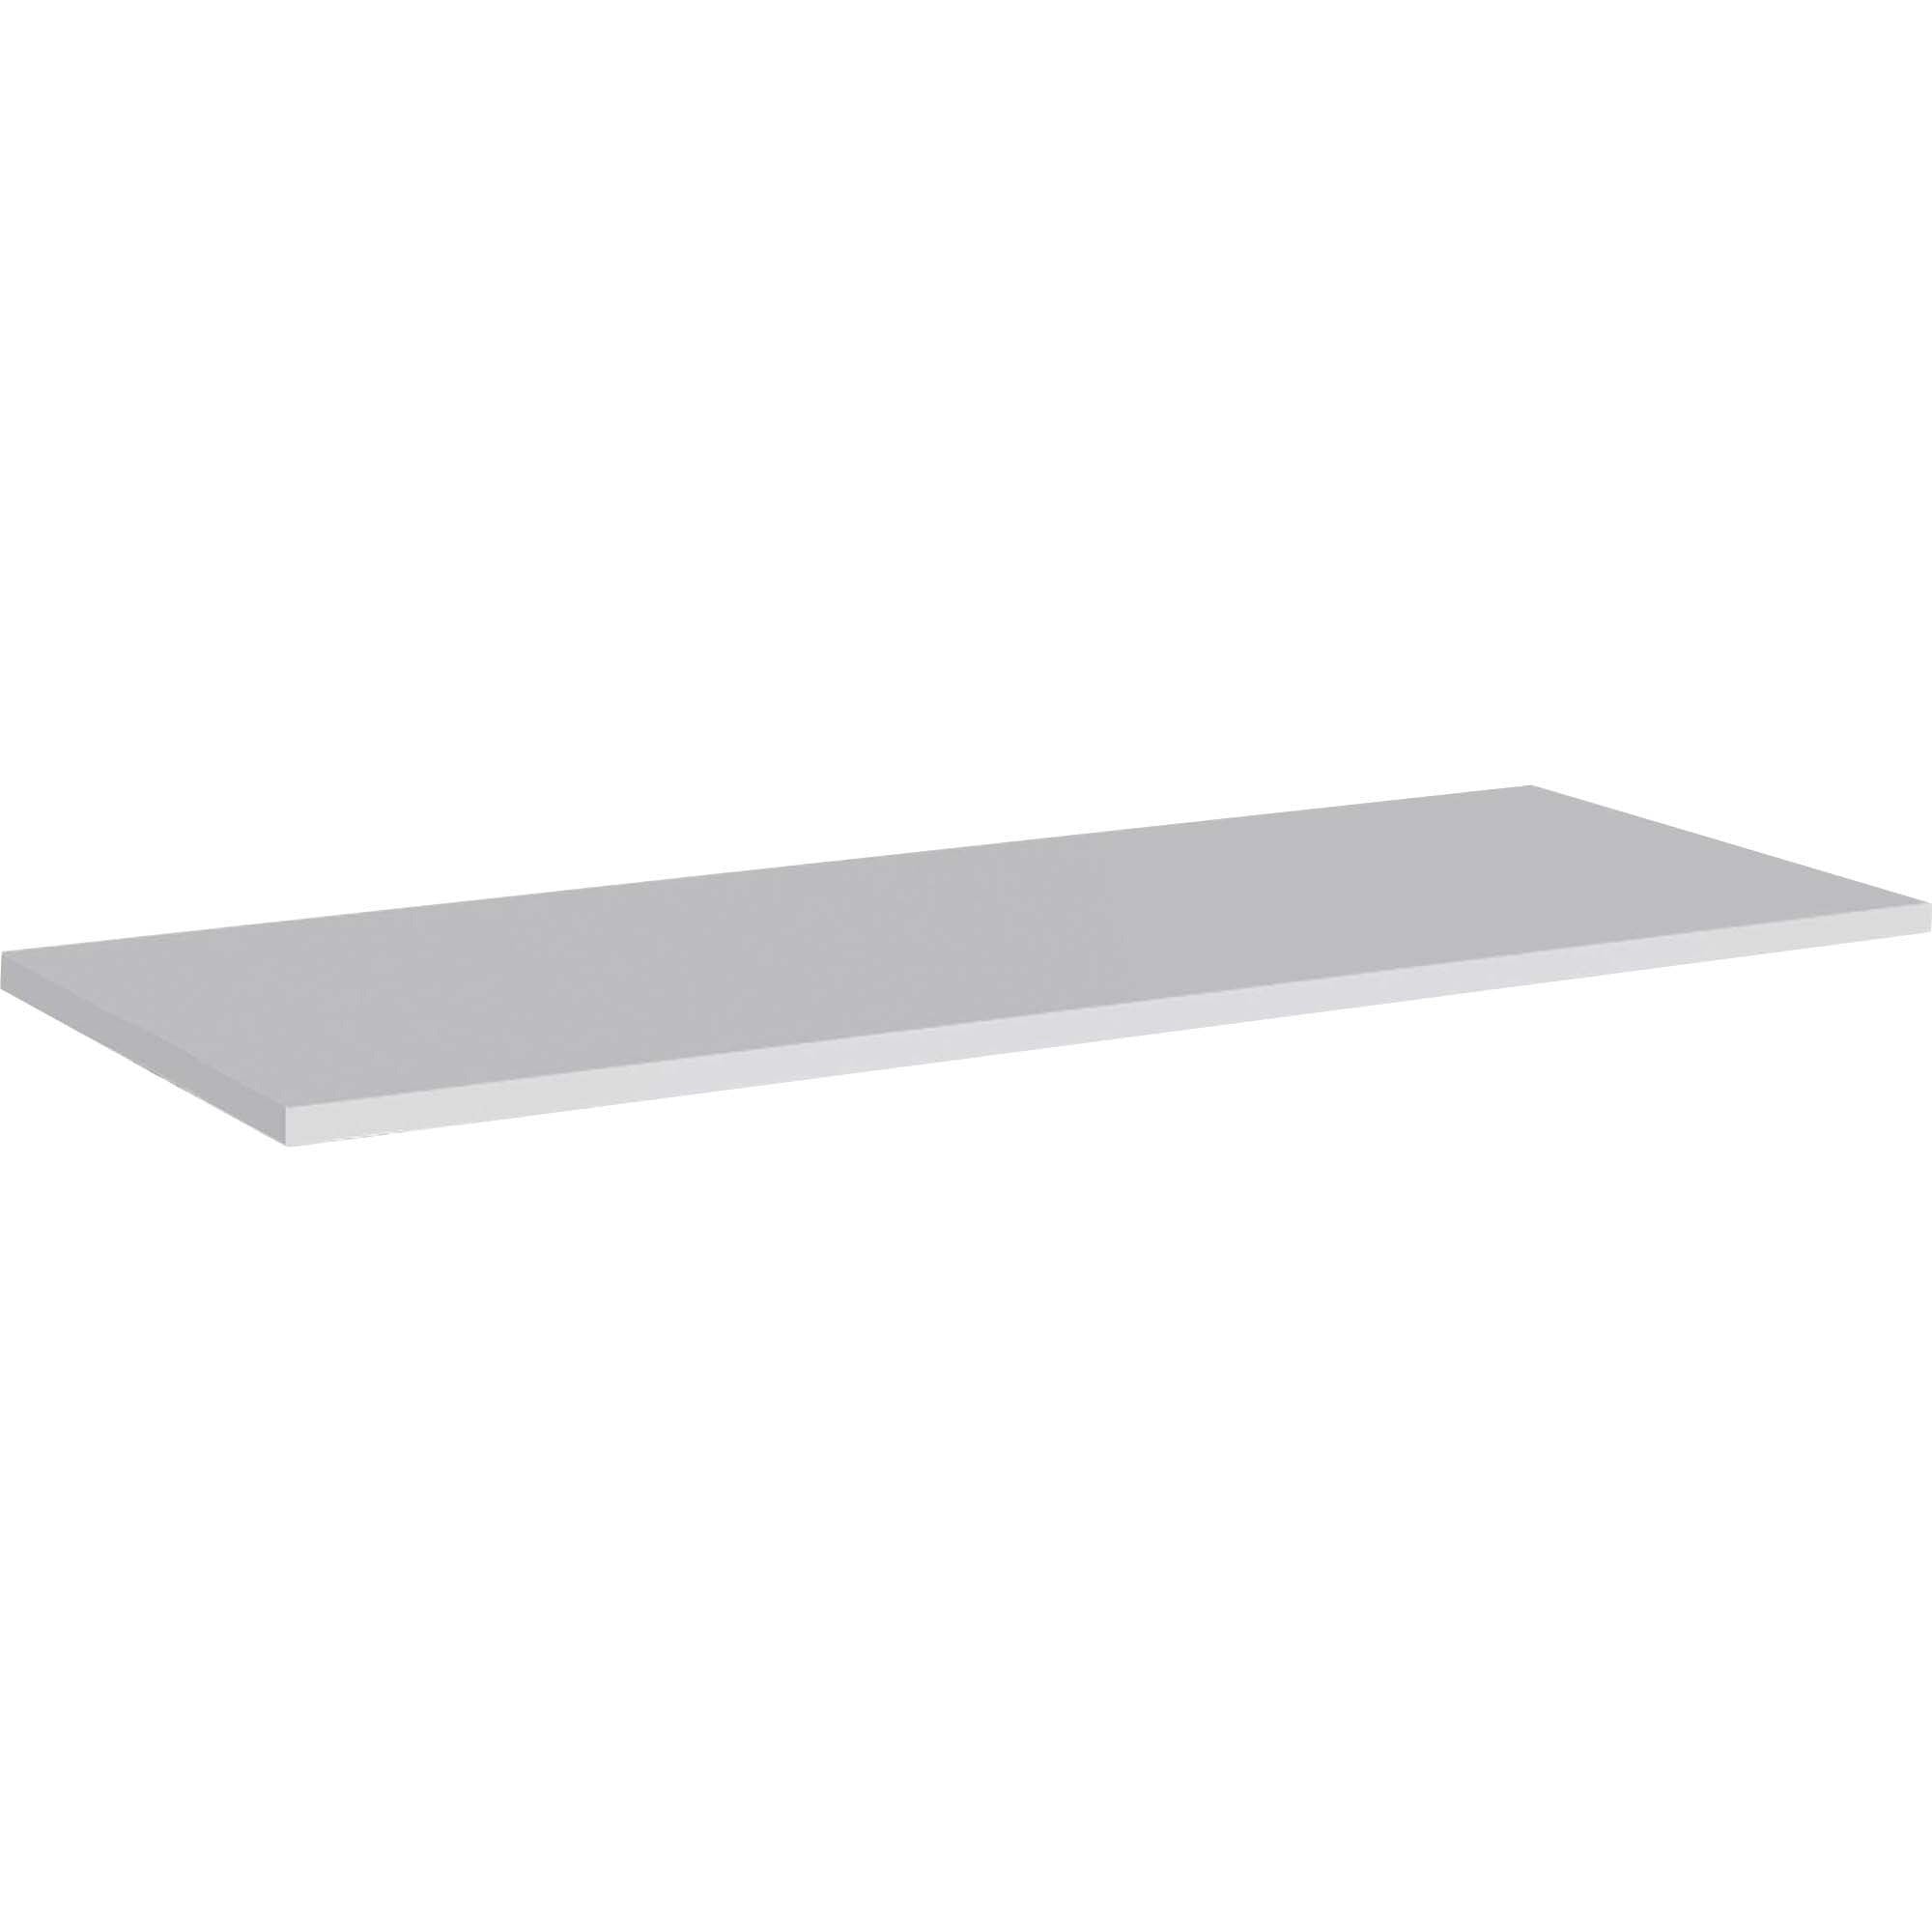 special-t-kingston-72w-table-laminate-tabletop-for-table-topgray-rectangle-low-pressure-laminate-lpl-top-72-table-top-length-x-24-table-top-width-x-1-table-top-thickness-1-each_sctsp2472gr - 1